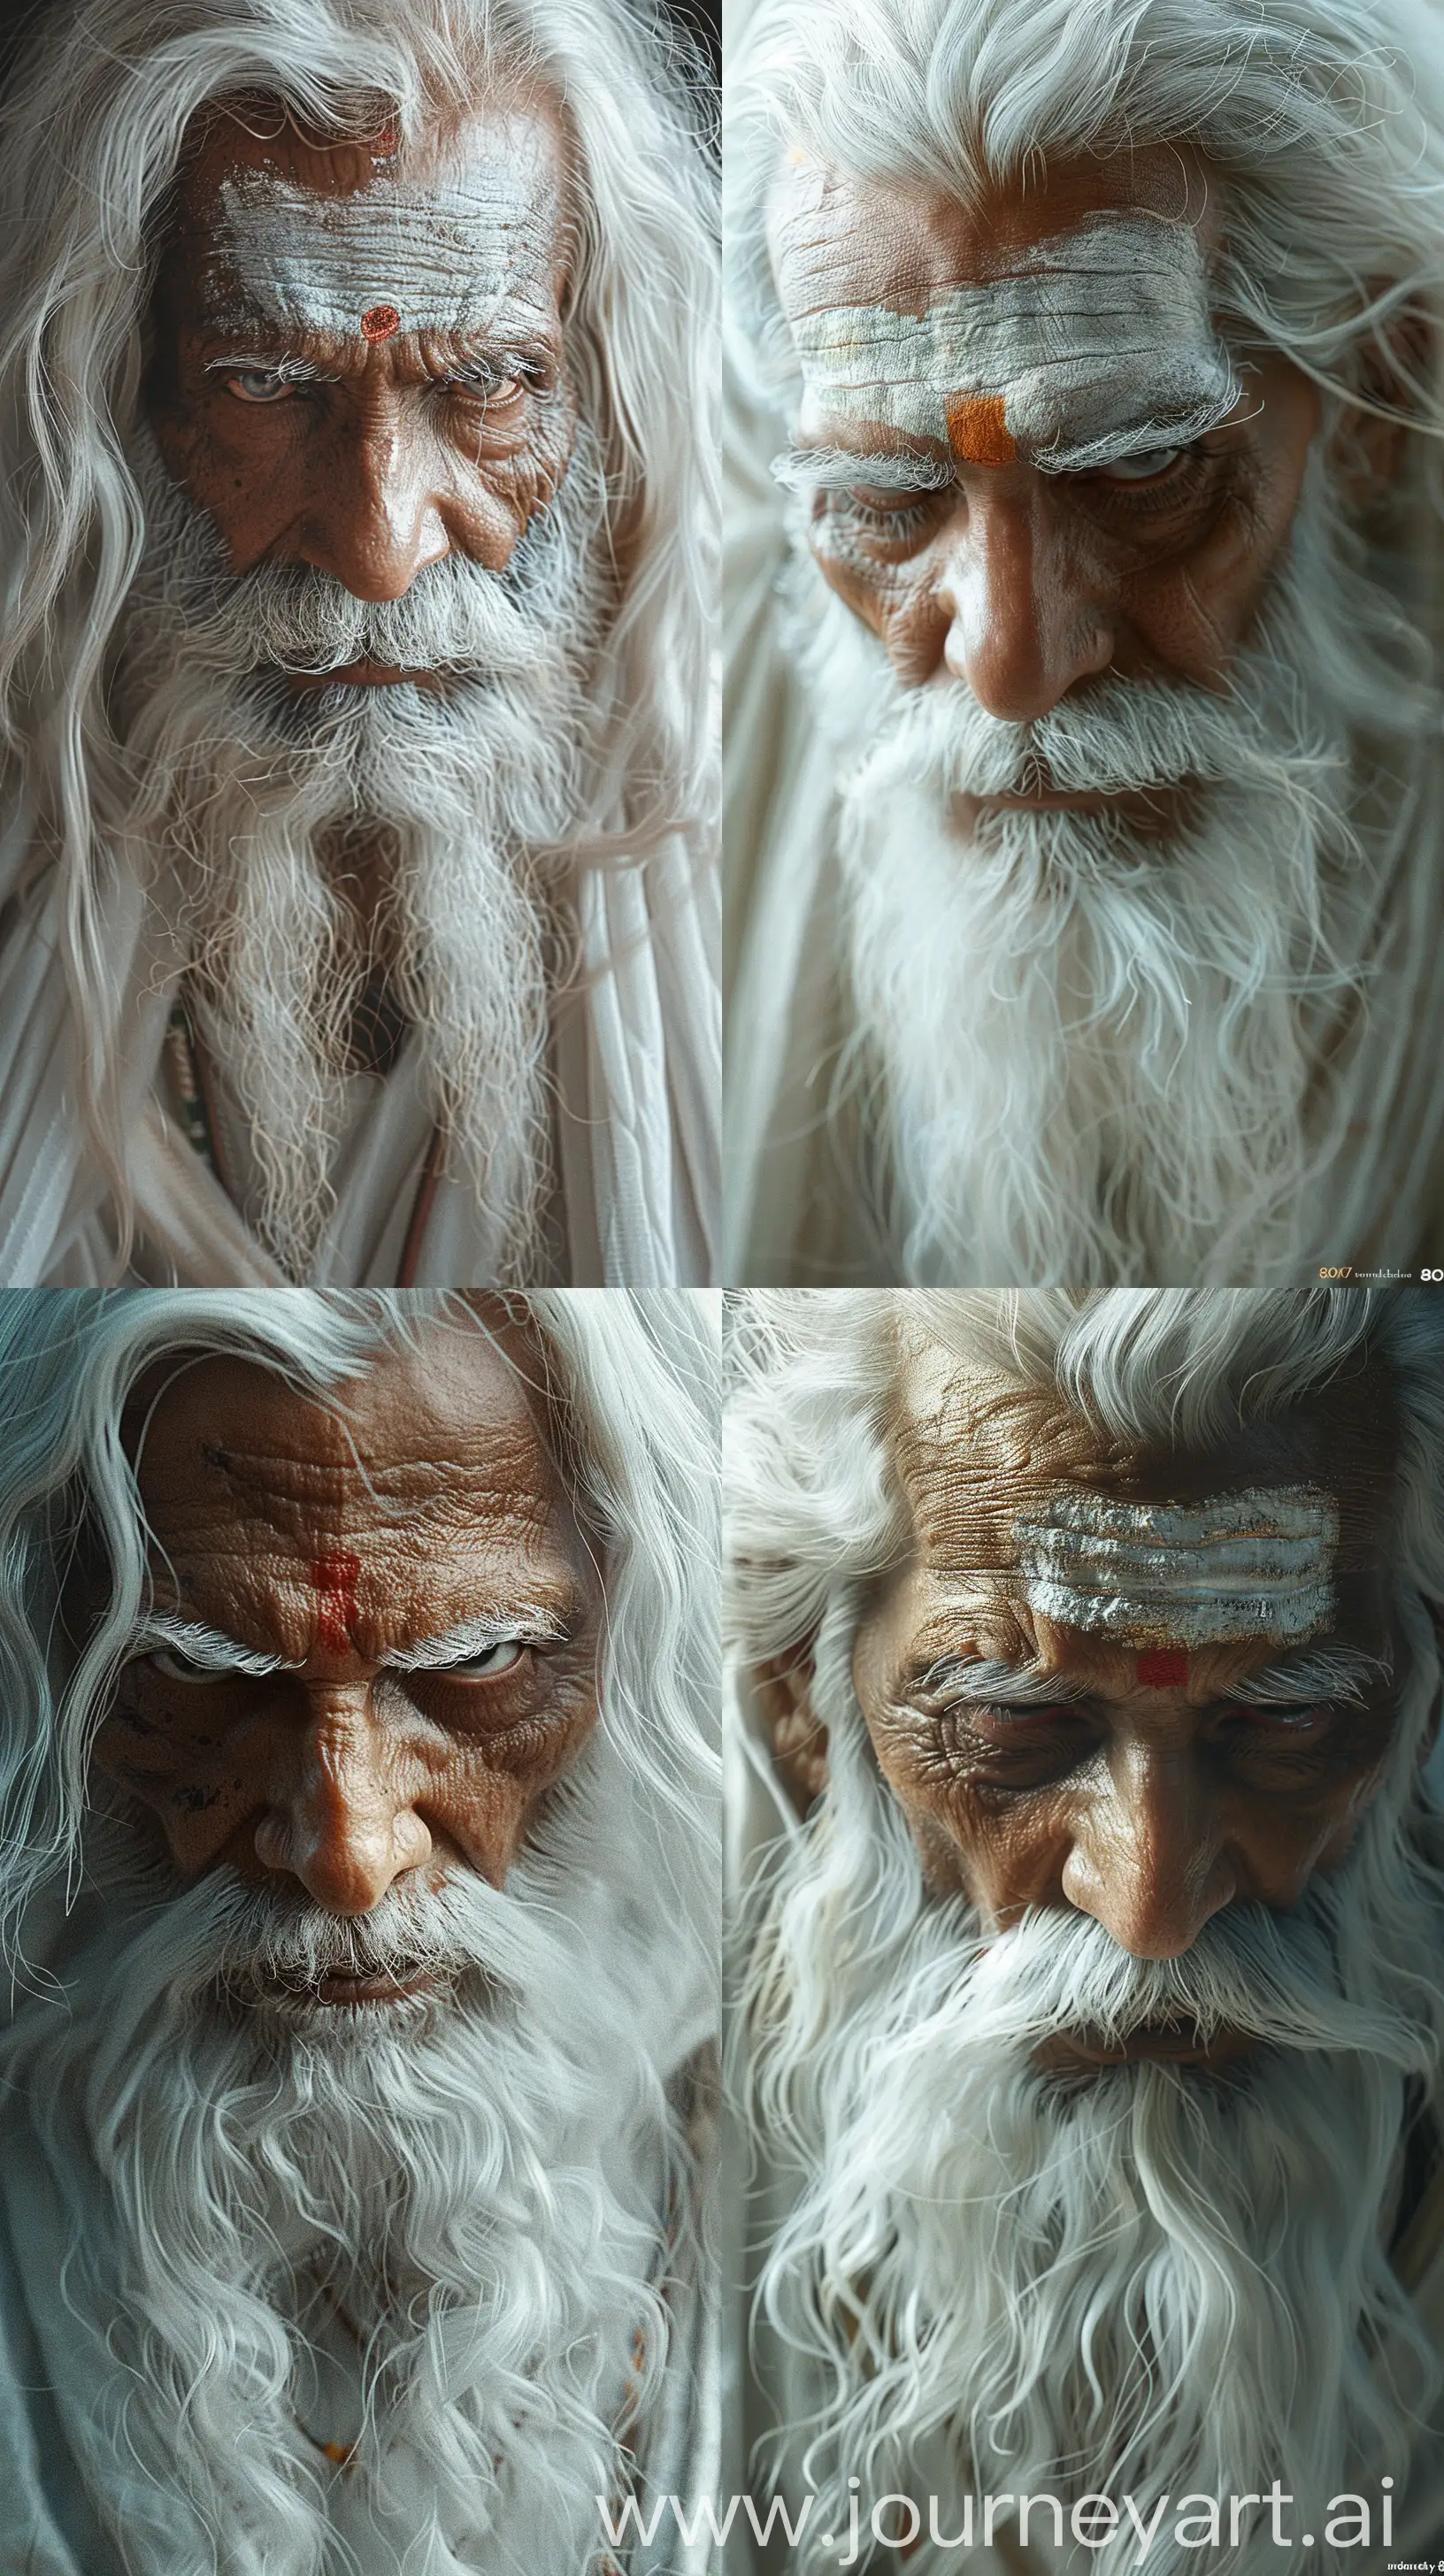 Elderly Indian sage, ancient times vibe, long white hair and beard, white attire, left eye closed, blind from his left eye, serious look on his face, close up, high resolution 8k detail, wise expression, aged skin textures, traditional attire, mystical aura --s 300 --ar 9:16 --v 6